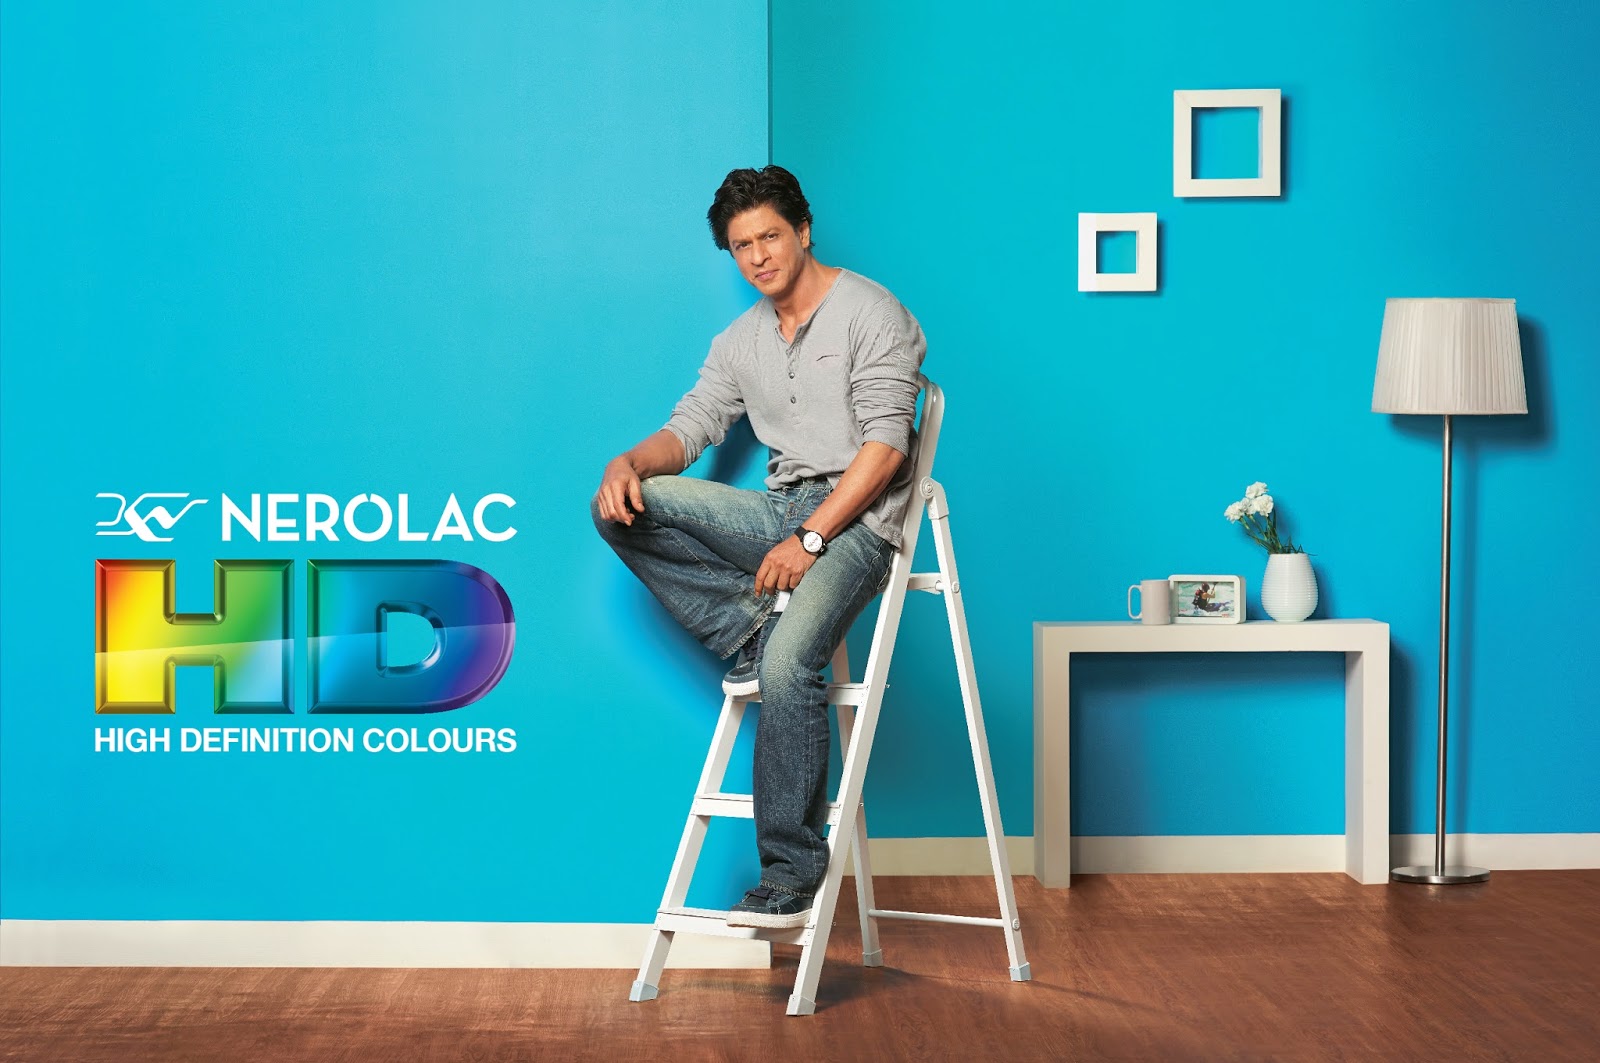 Bollywood Bubbles: Kansai Nerolac revolutionizes paint industry in India  with the first ever 'High-Definition' paints !